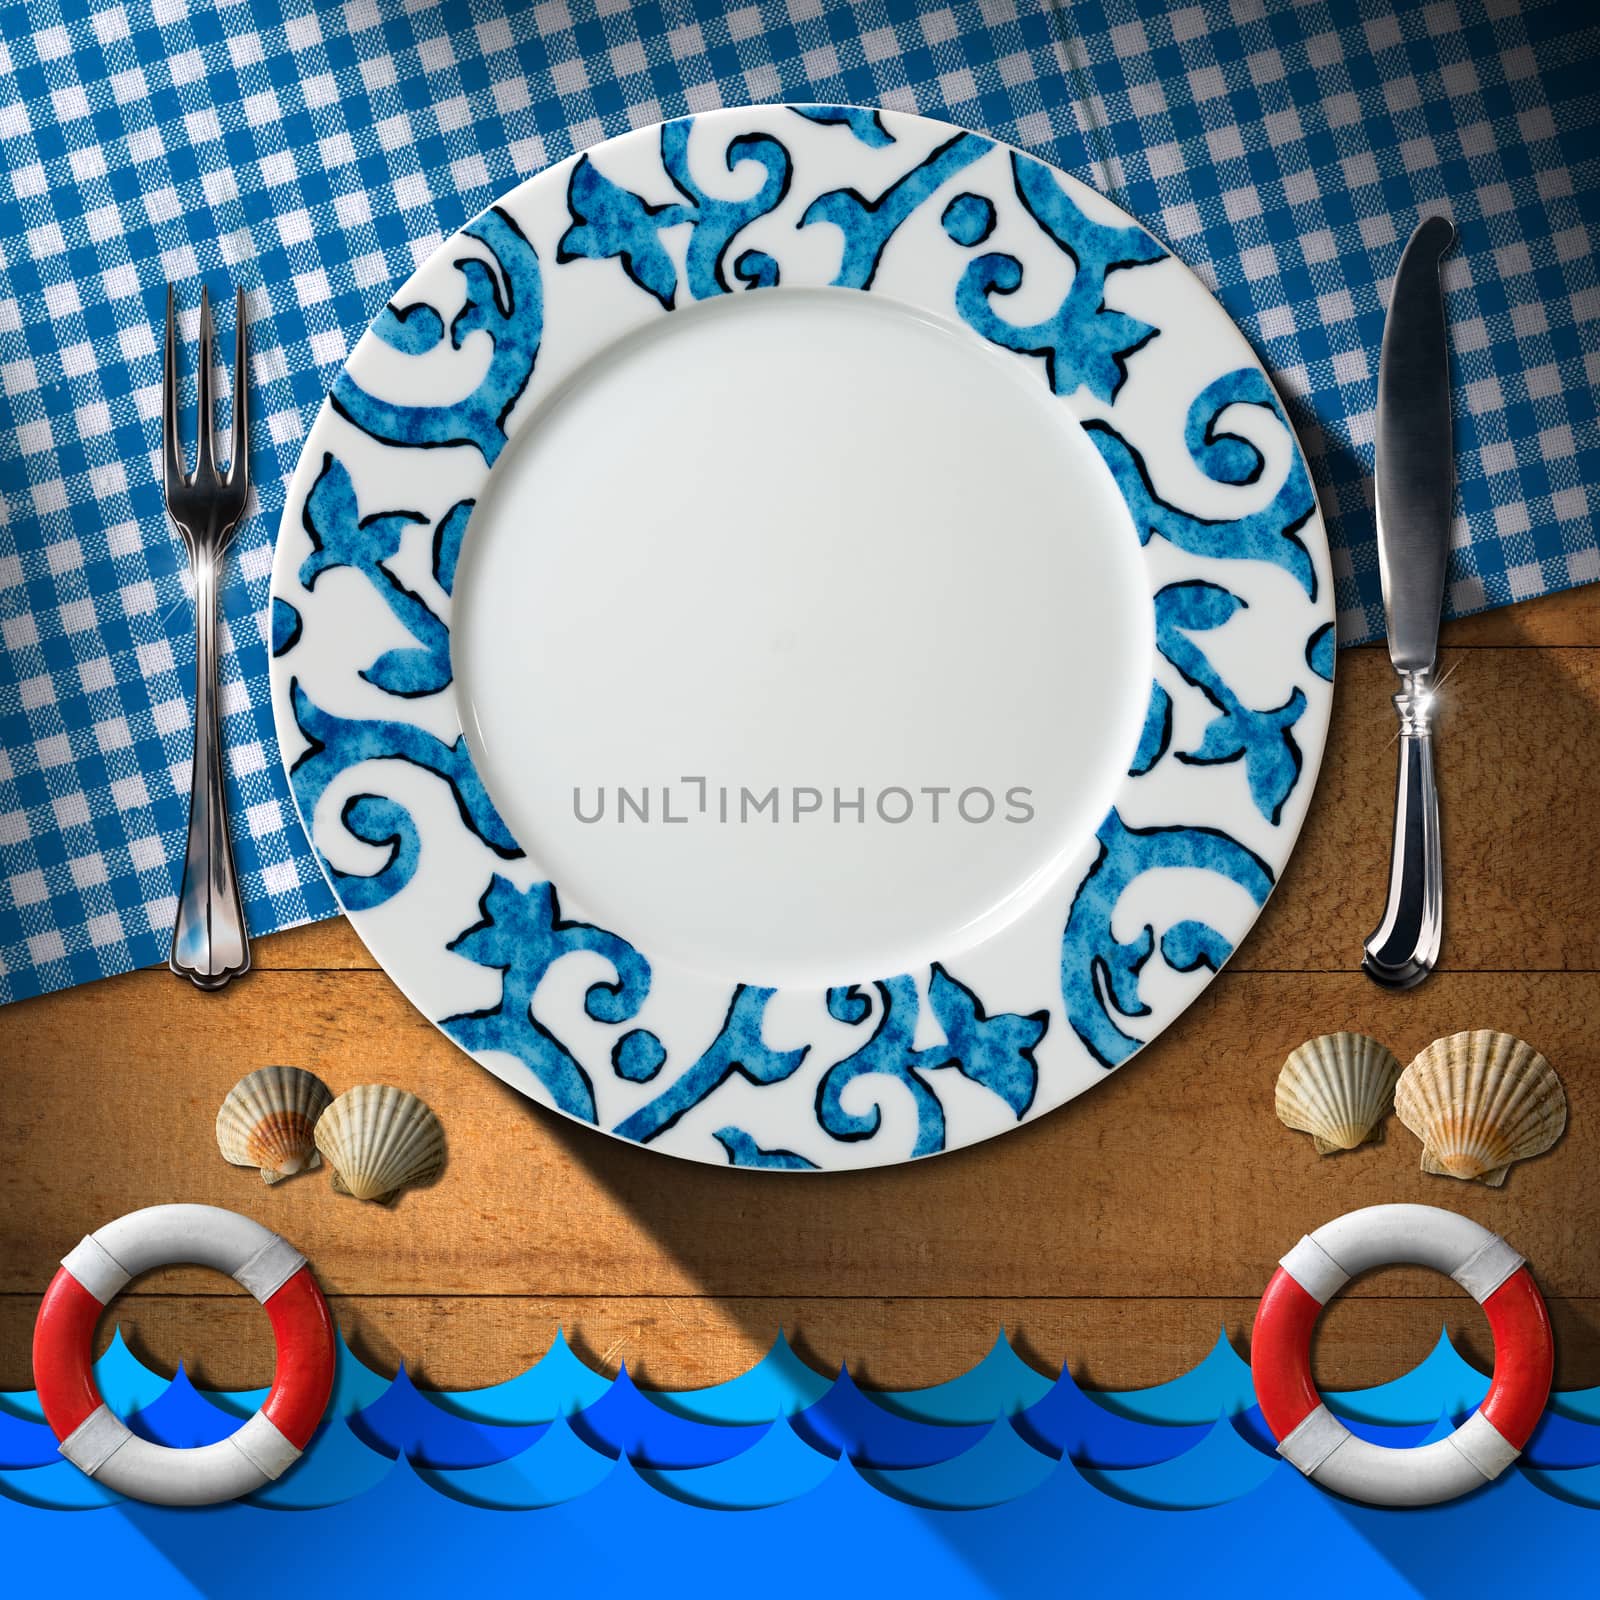 Empty plate with fork and knife, blue and white checkered tablecloth, seashells, blue waves and two lifebuoys. Table set for a seafood menu
